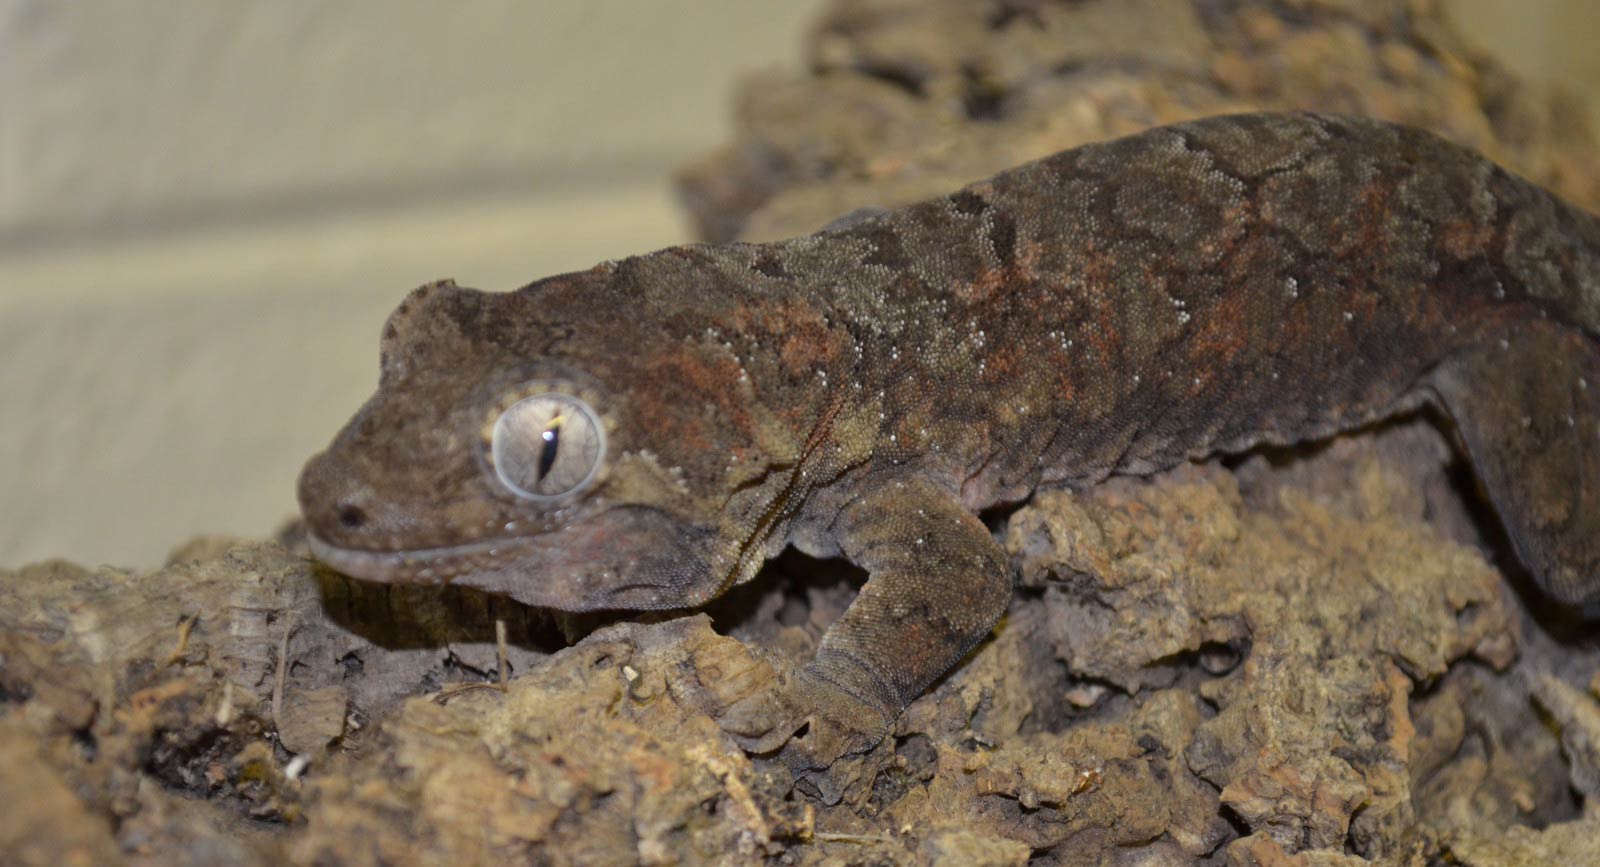 Mossy Prehensile Tailed Gecko